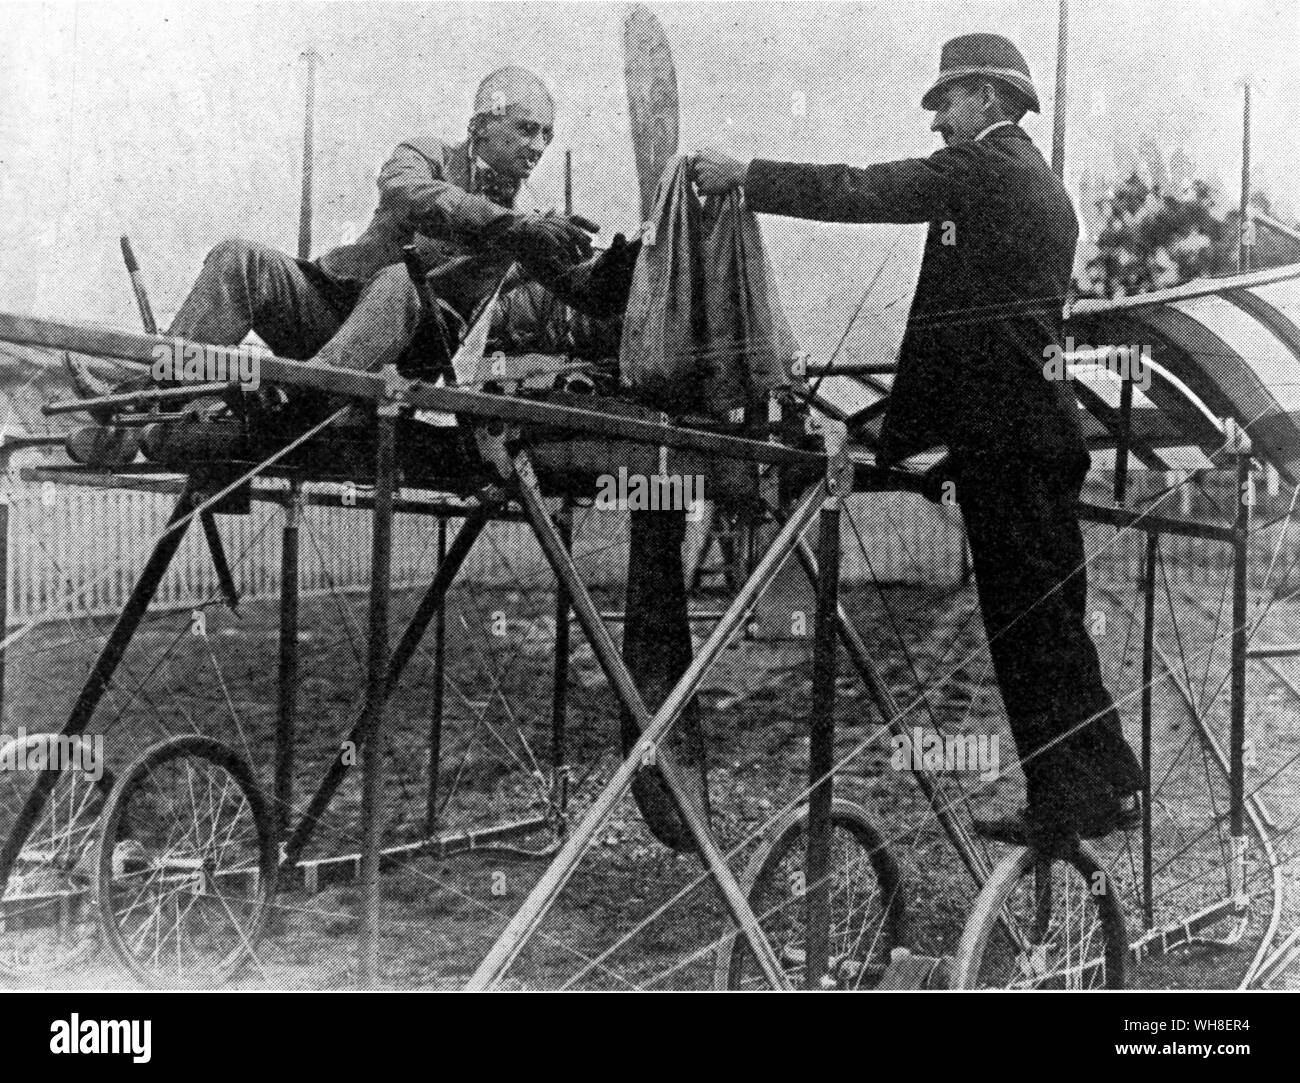 First UK Aerial Post. Postman handing bag to airman. The first mail to be carried by an air vehicle was on 7 January 1785, on a balloon flight from Dover to France near Calais. Stock Photo